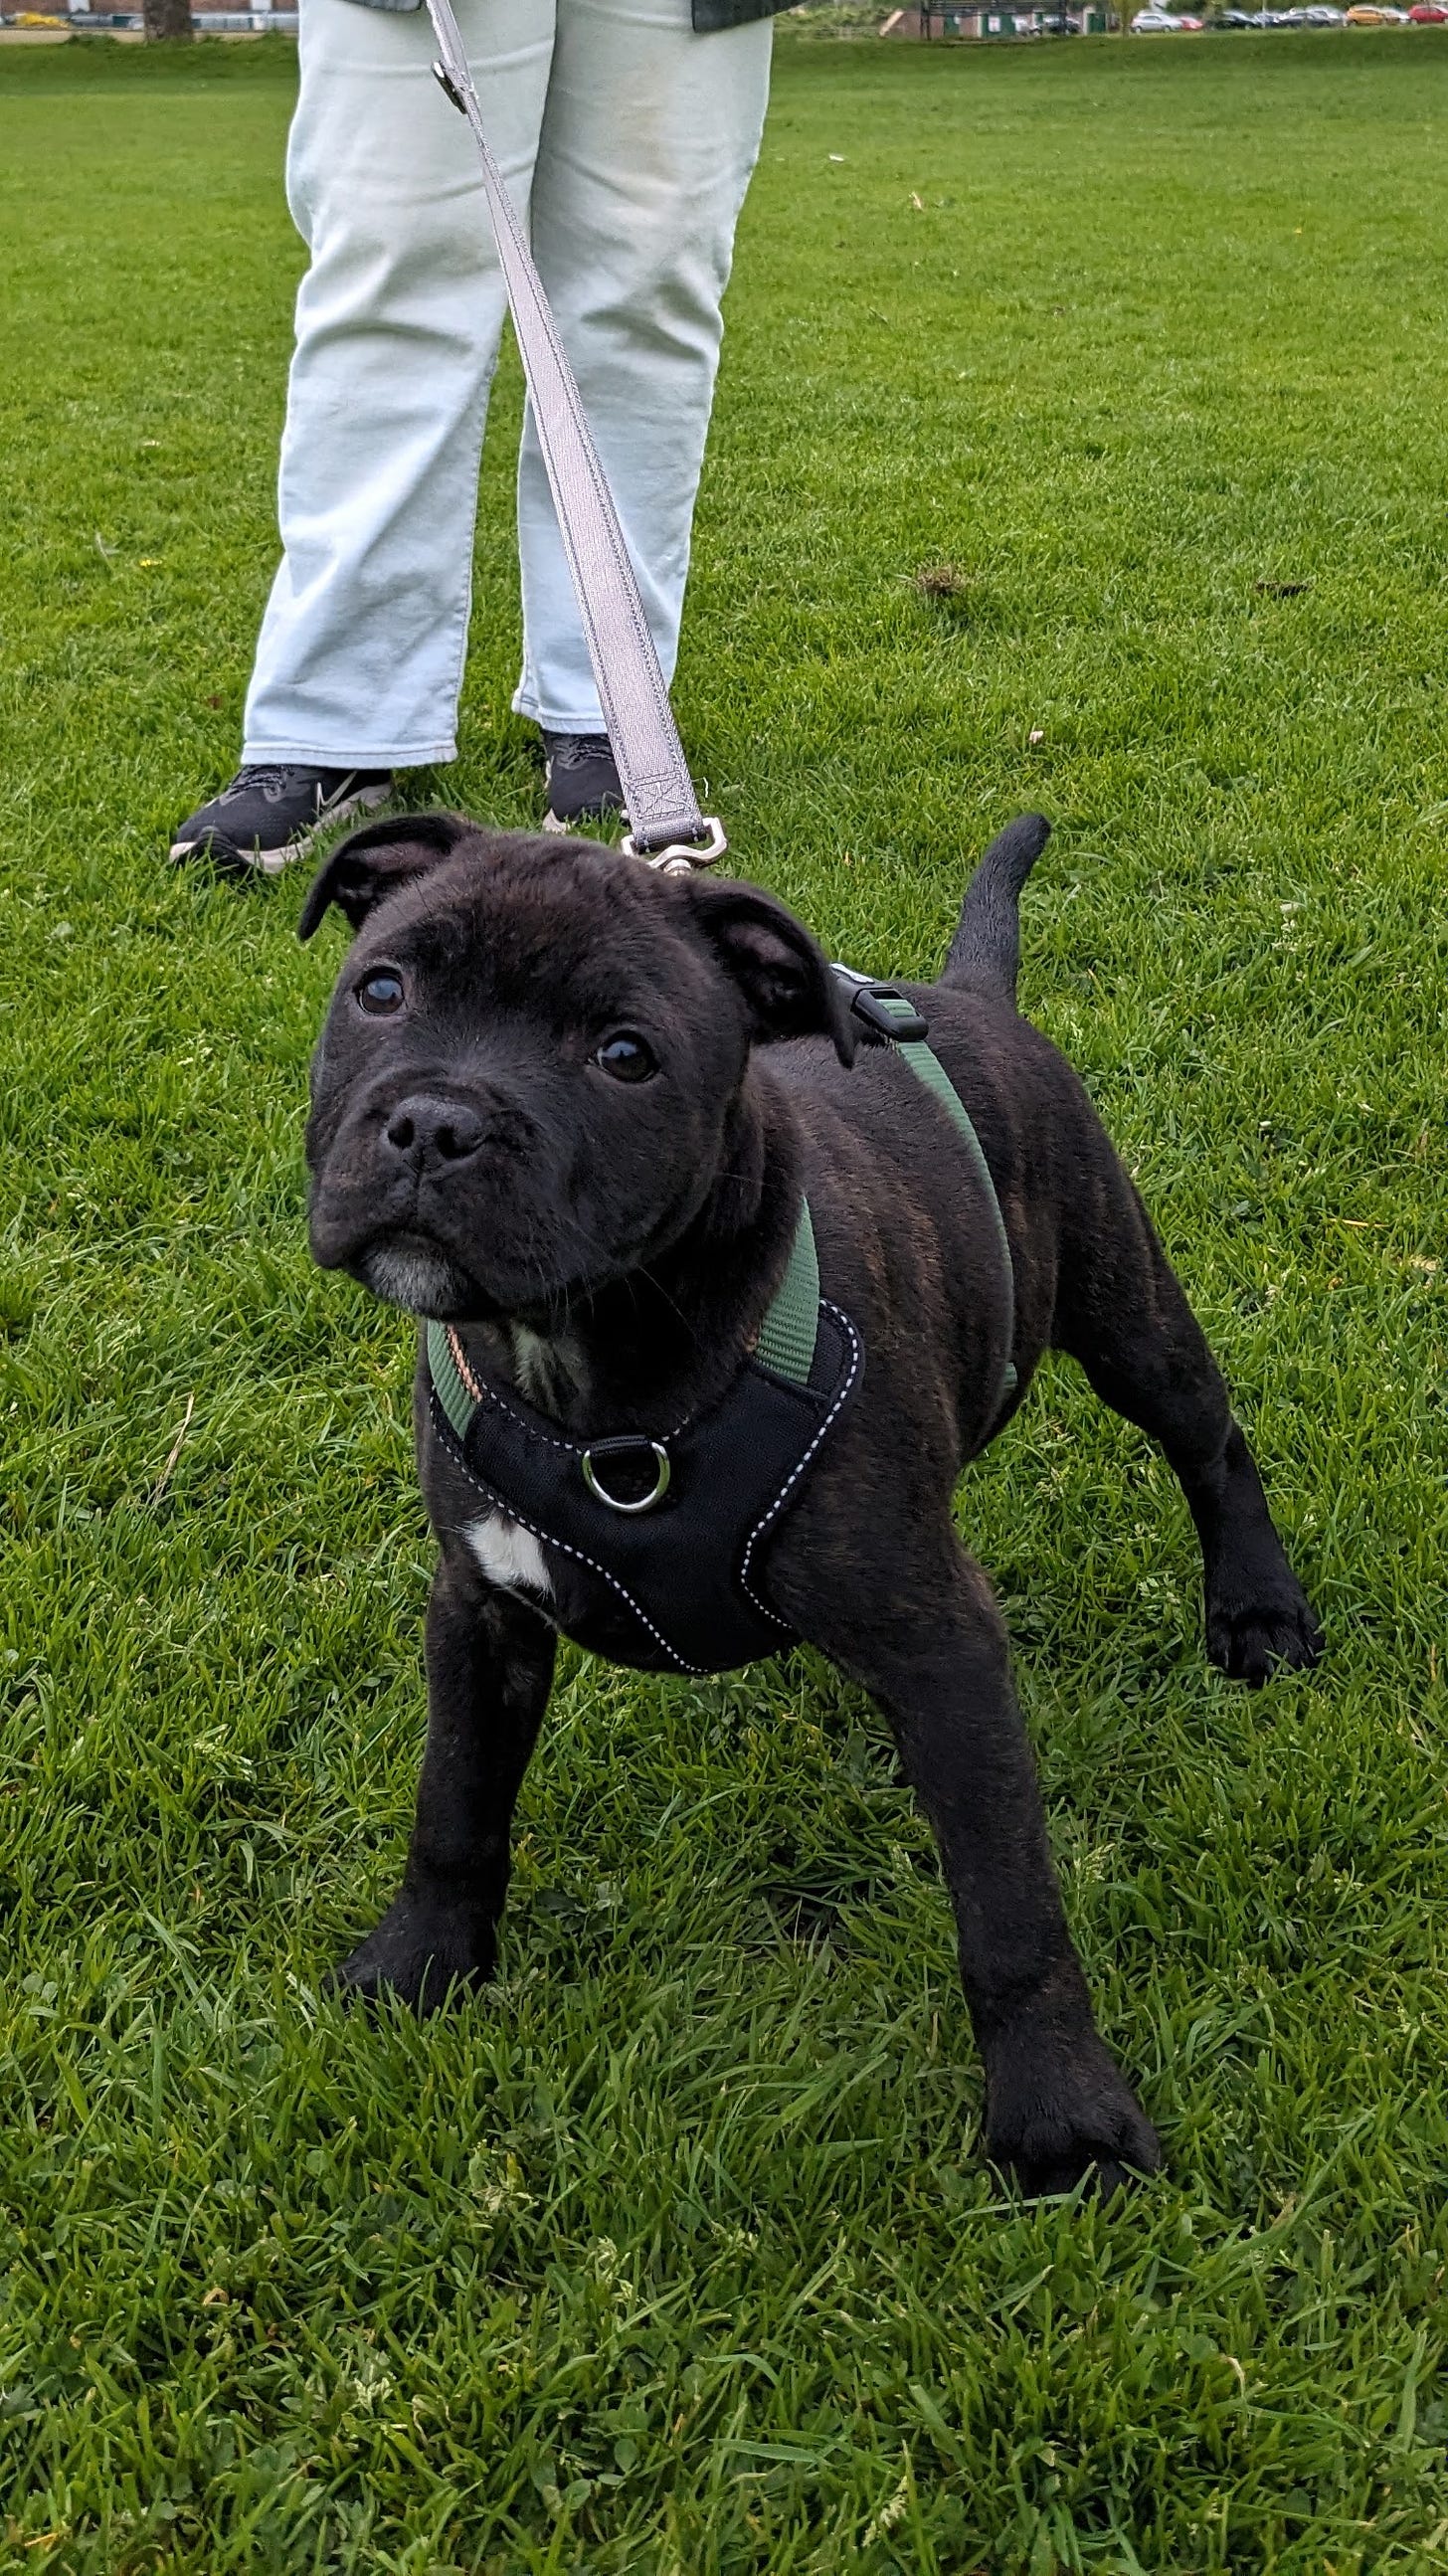 A photo of Bran, a staffordshire bull terrier puppy standing on green, green grass.